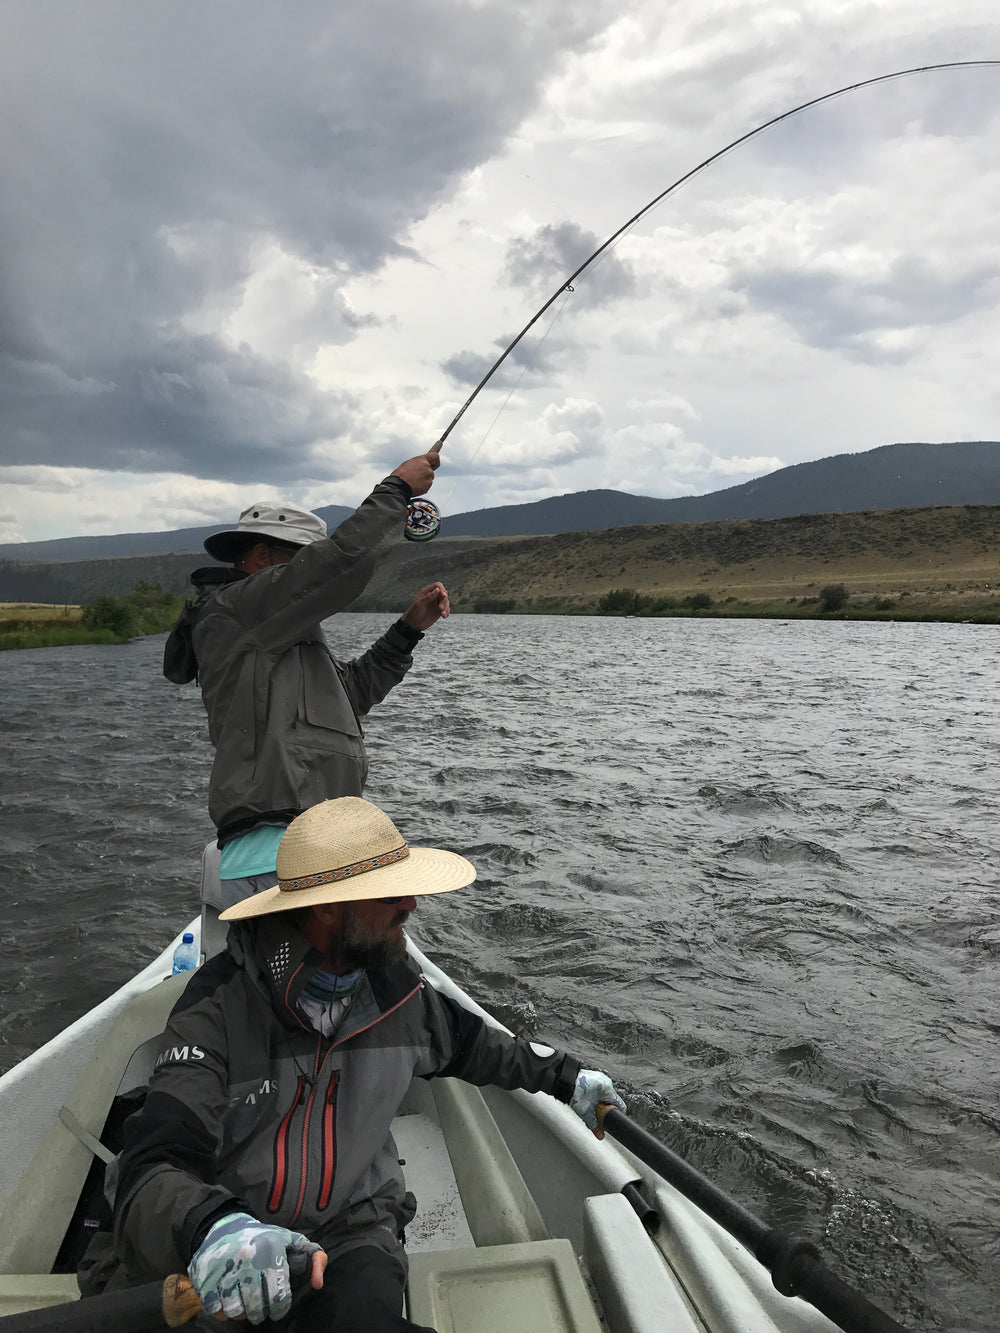 Fish on, guide Brian Rosenberg on the sticks managing the boat to help land this fish while during a float fishing guide trip on the Madison River near Ennis, Montana